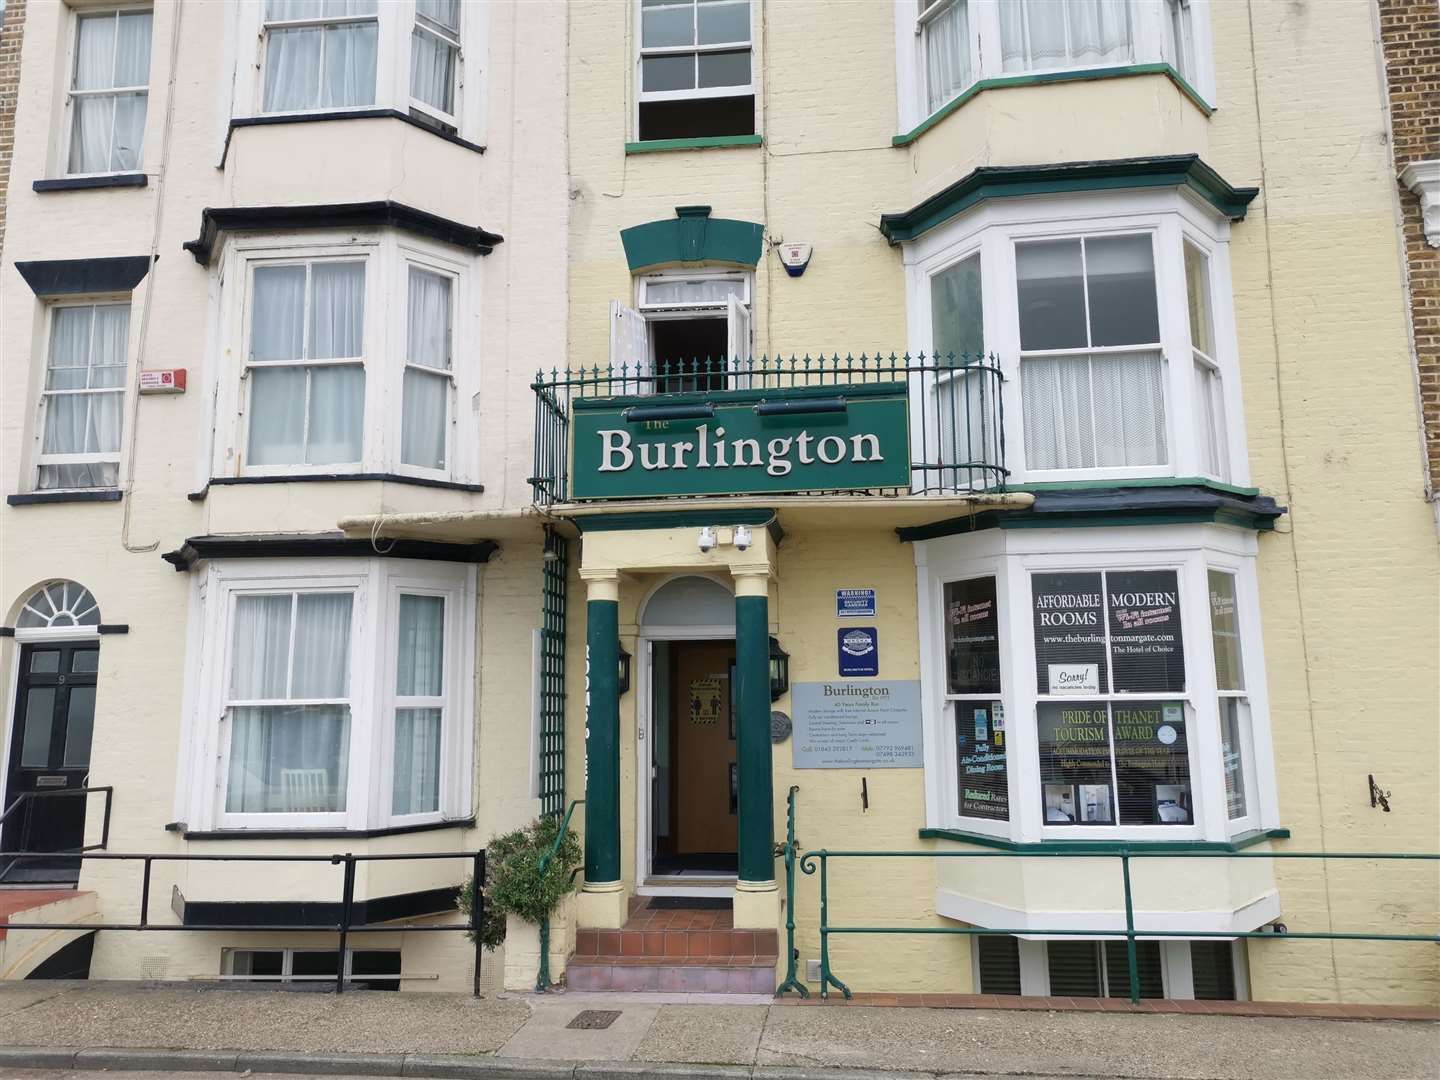 The Burlington hotel where 77-year-old Sidney Collier lived